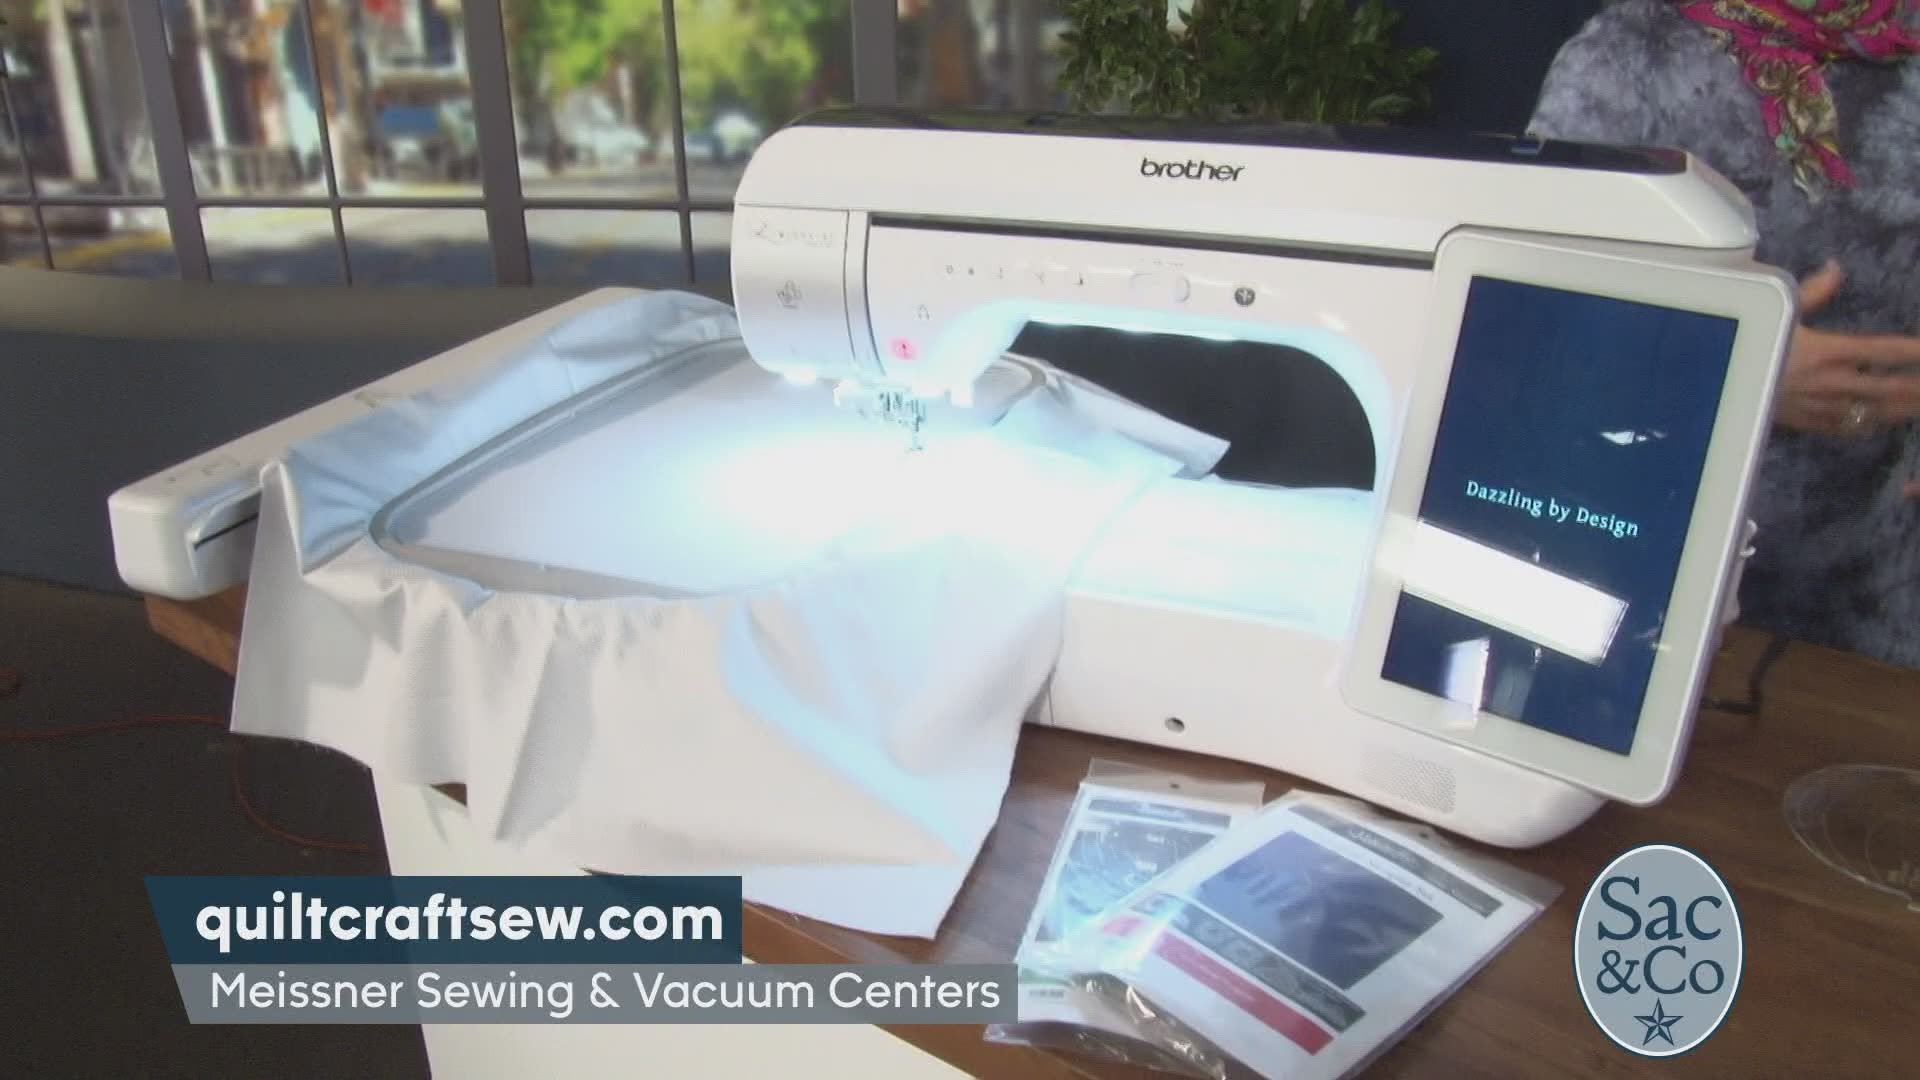 Do you love crafting or sewing? If so, good news! Sacramento is hosting a Quilt, Craft & Sewing Festival. Learn more about what to expect at the show and some new trends in quilting and sewing. The following is a paid segment sponsored by Meissner Sewing and Vac Centers.